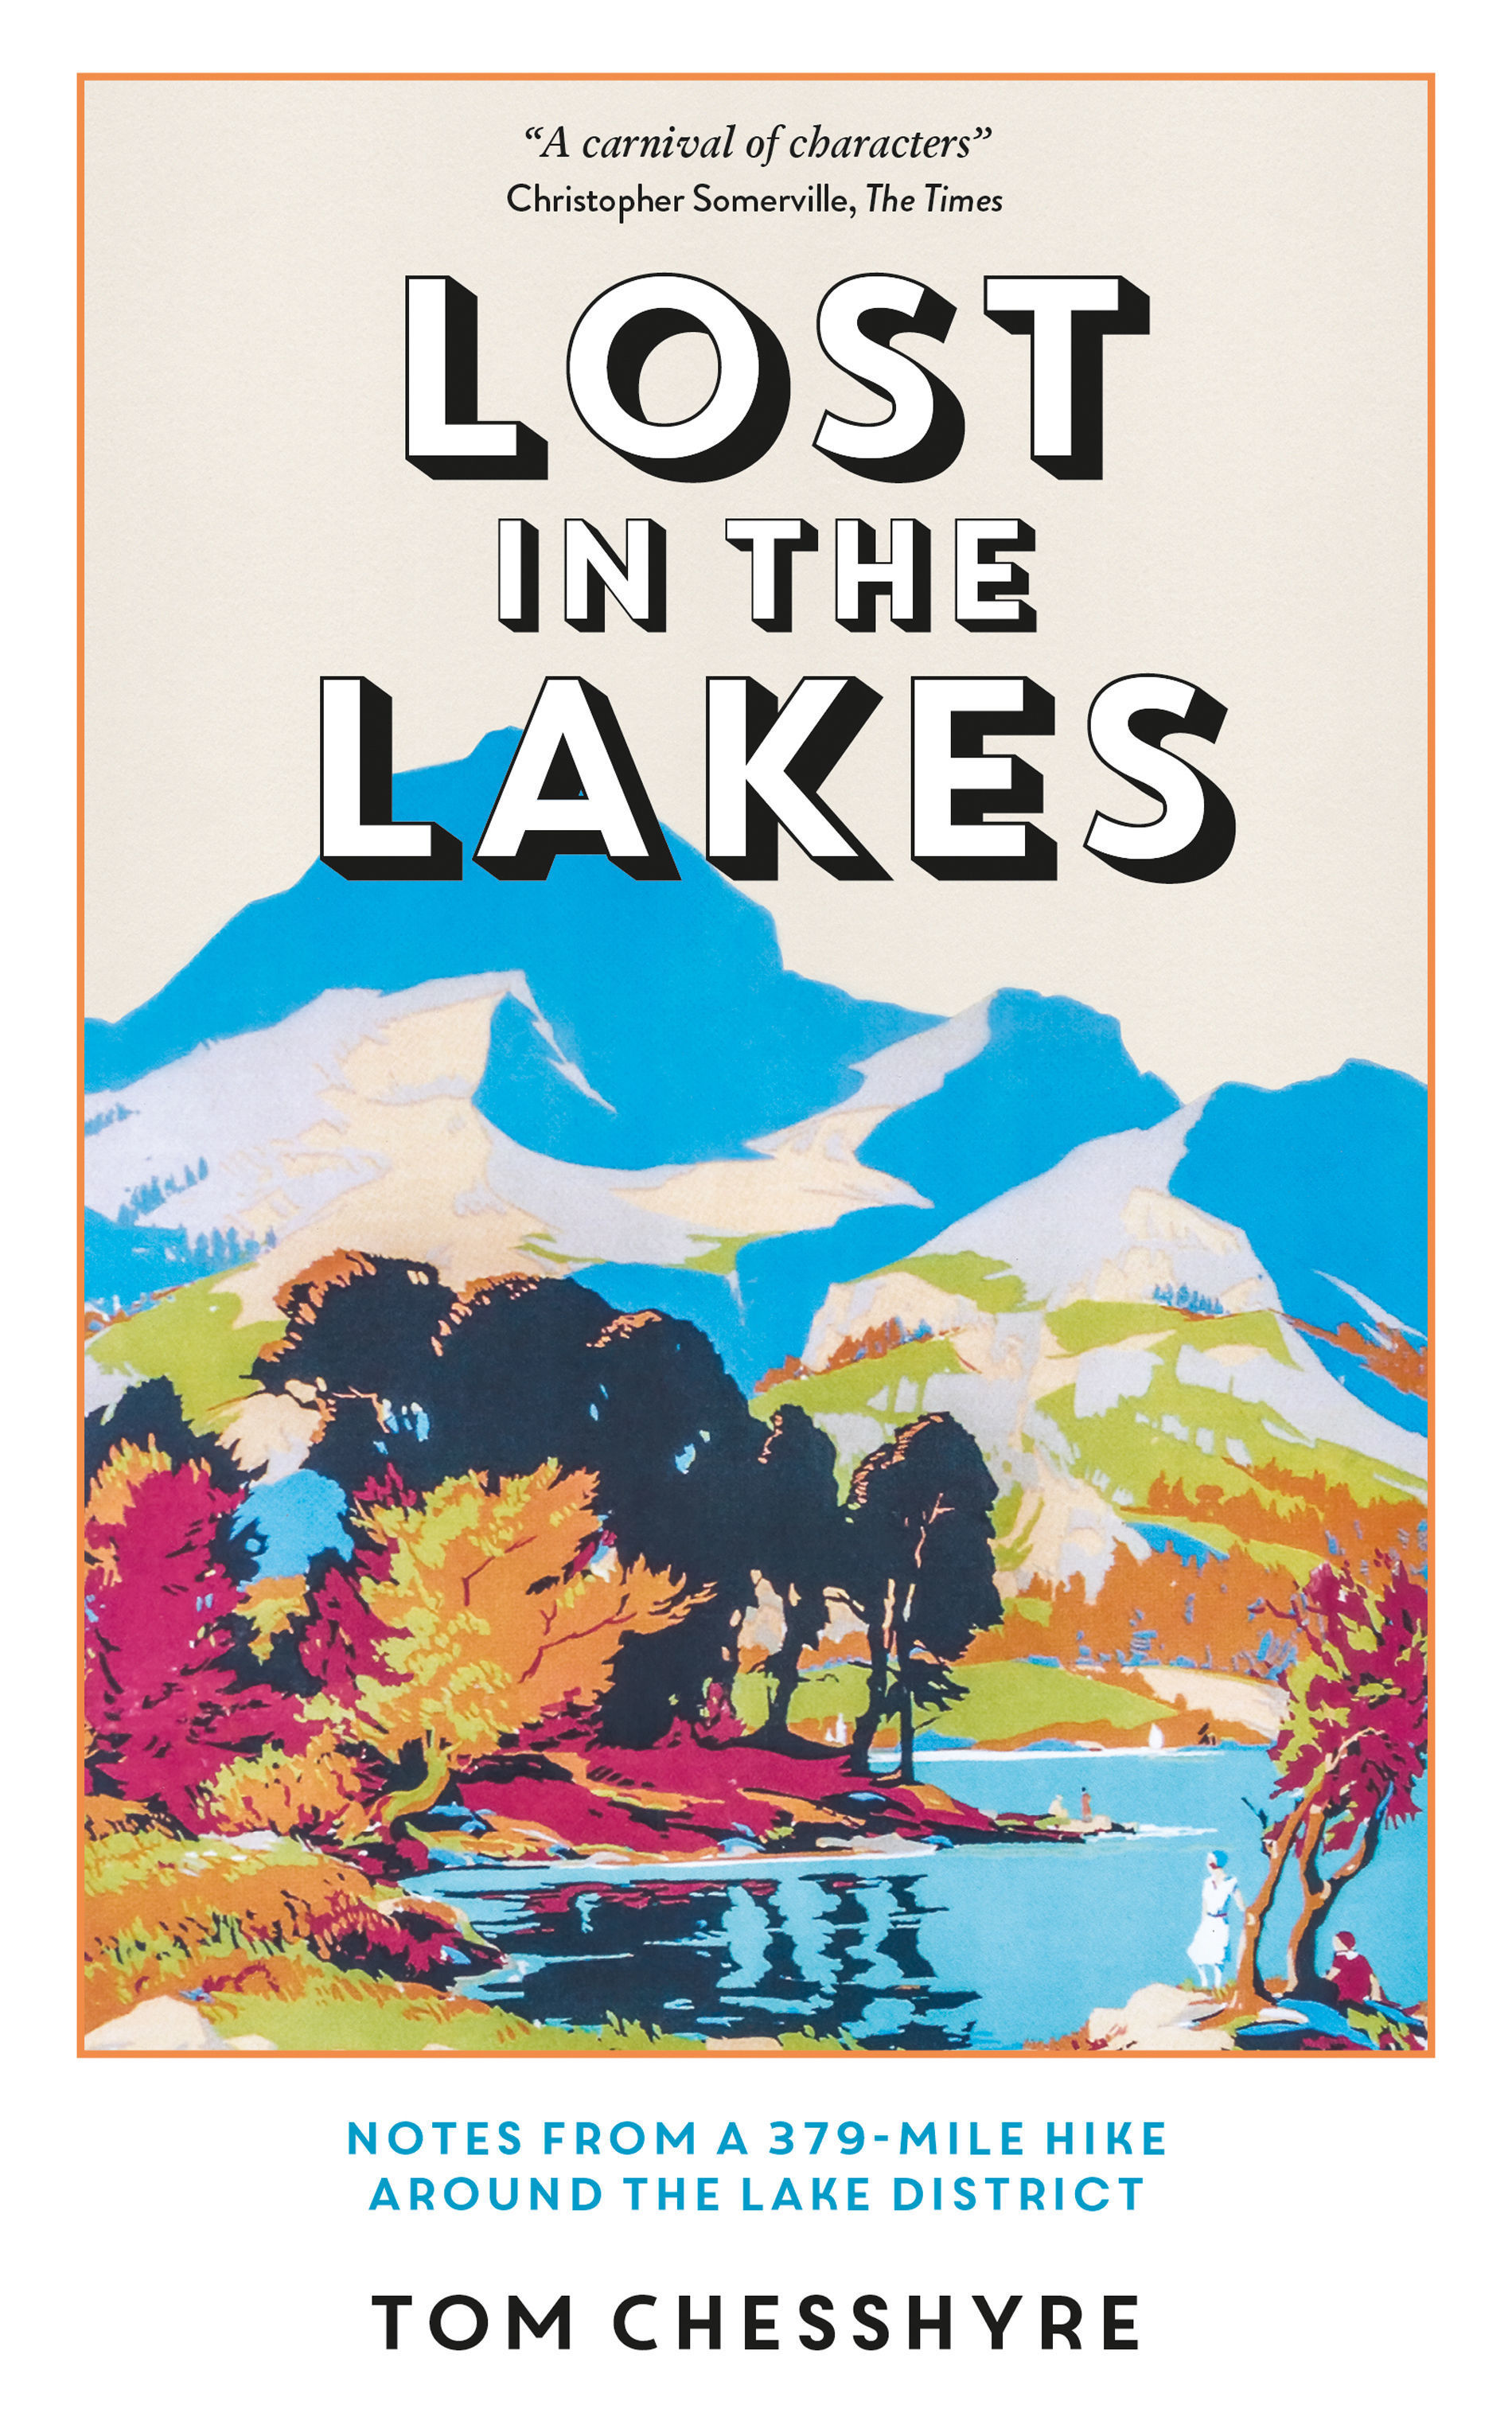 Lost In The Lakes, the new book by Tom Chesshyre